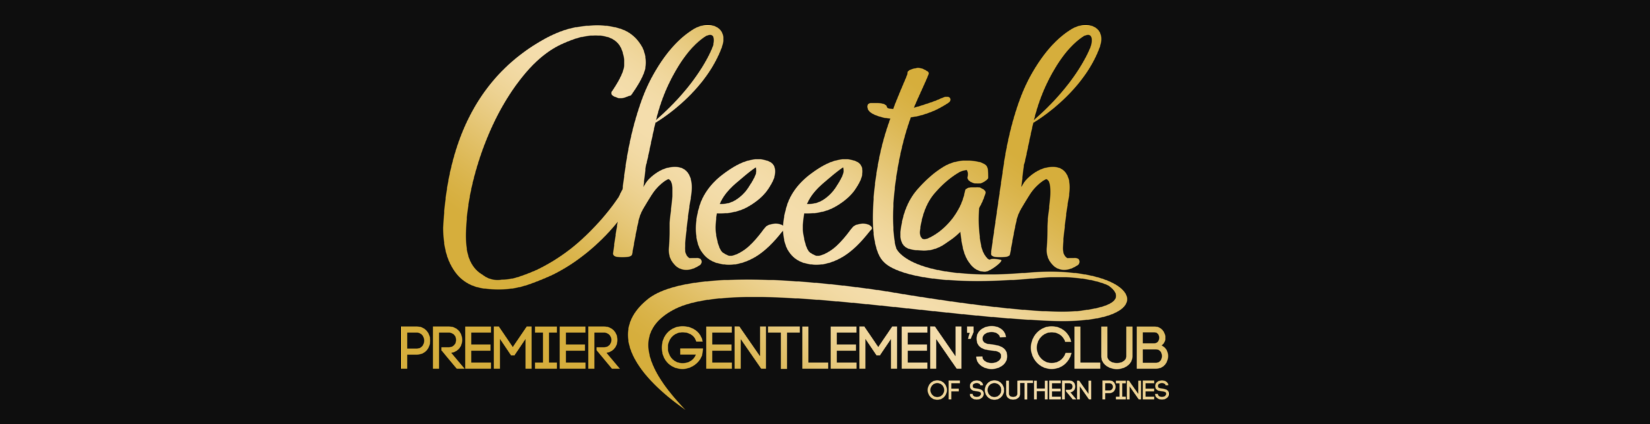 Banner for Cheetah of Southern Pines